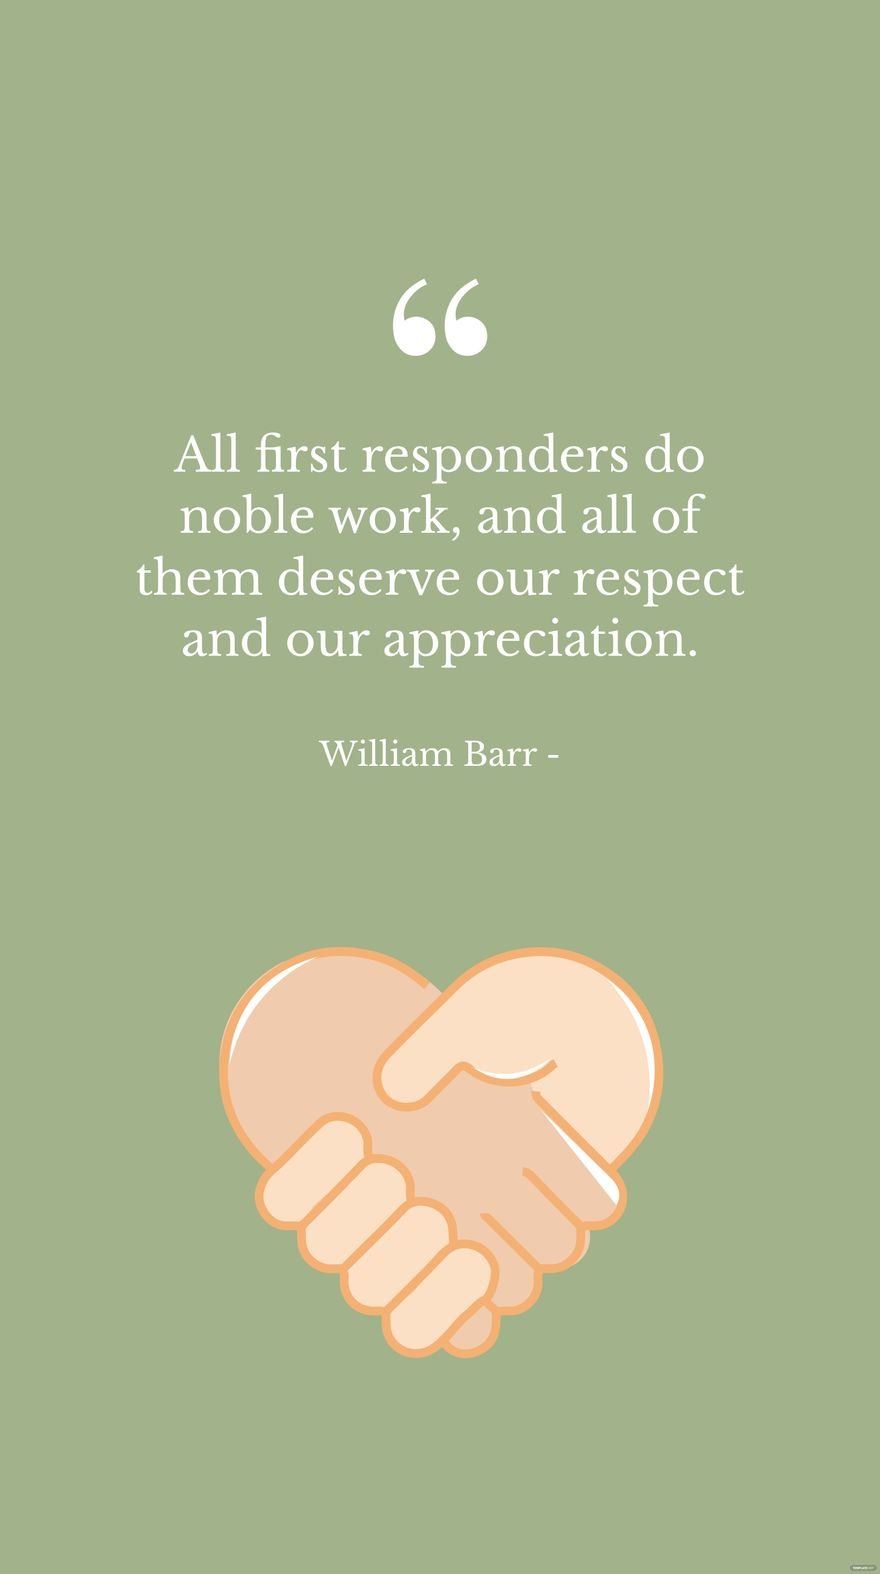 William Barr - All first responders do noble work, and all of them deserve our respect and our appreciation.